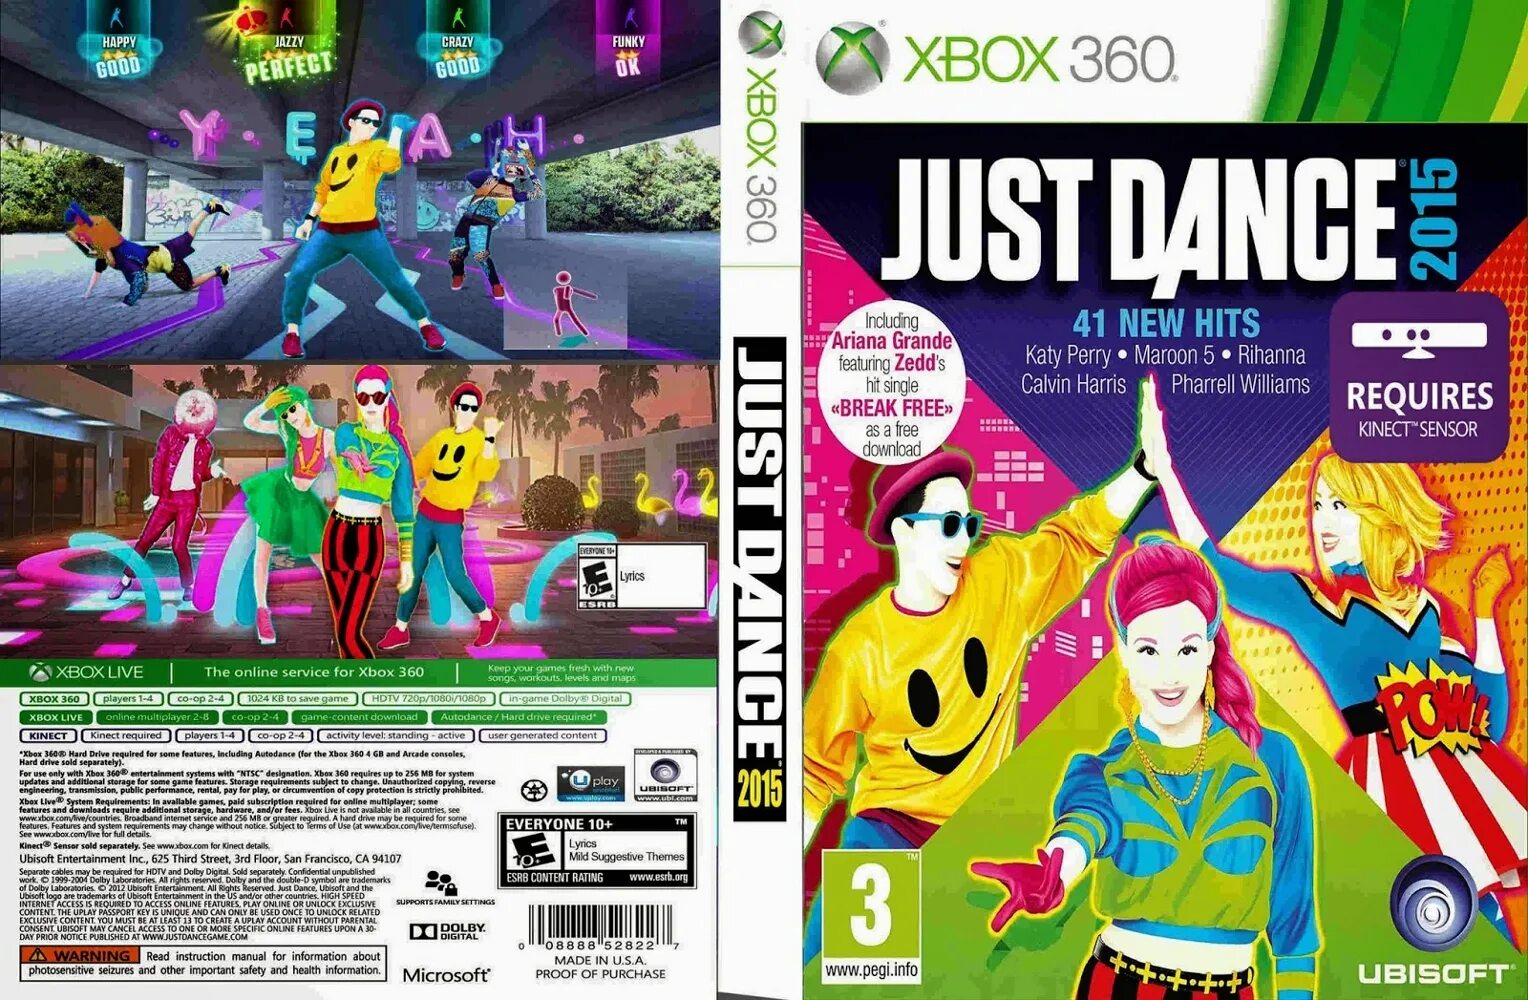 Xbox 360 just Dance 2015 Kinect. Just Dance Xbox 360 обложка. Диск Xbox 360 just Dance 2015 Kinect. Just Dance 3 Xbox 360 обложка.